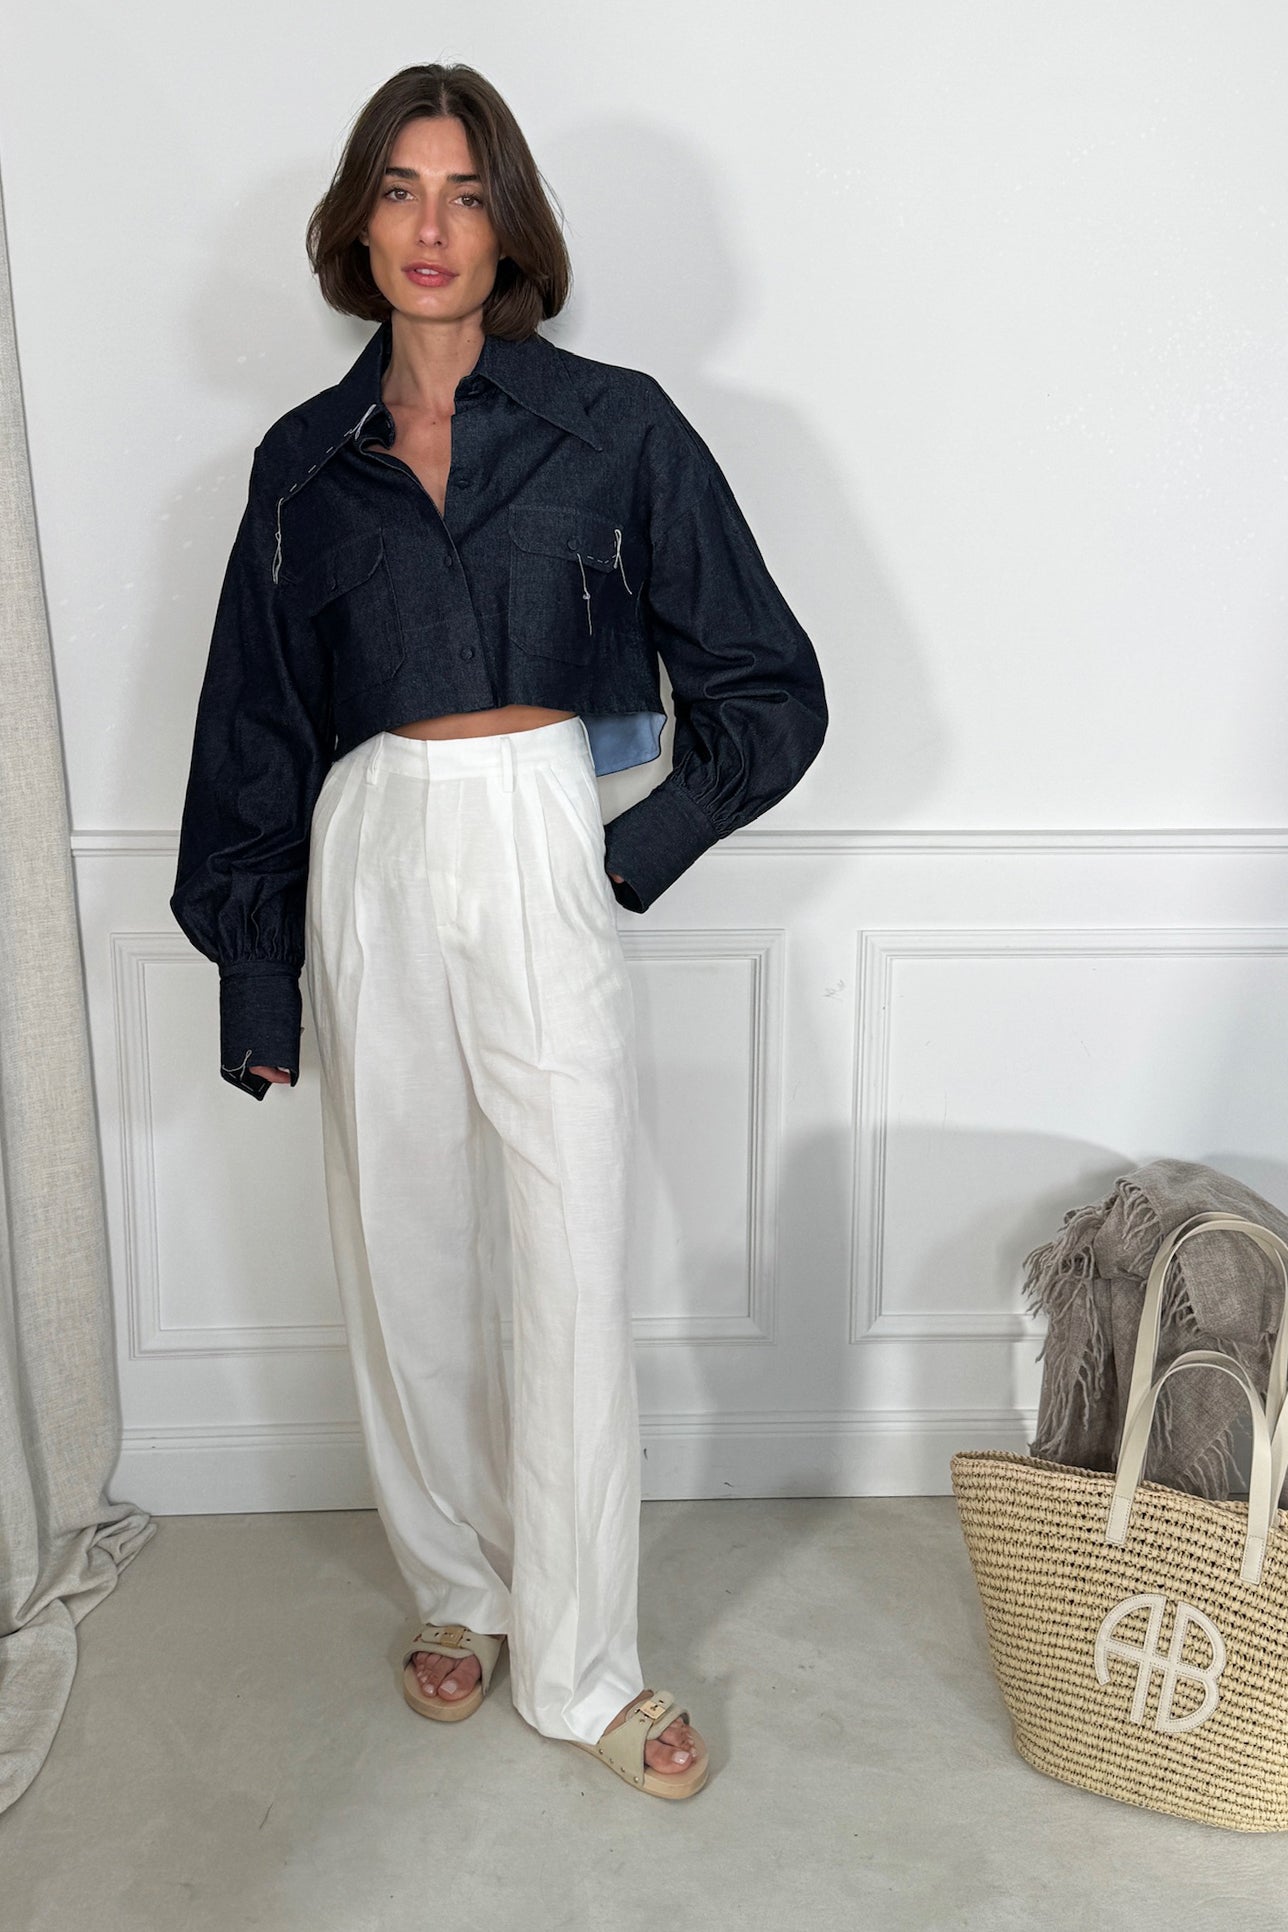 Jeansbluse Crop Jagger in NavyMaison Jejia - Anita Hass